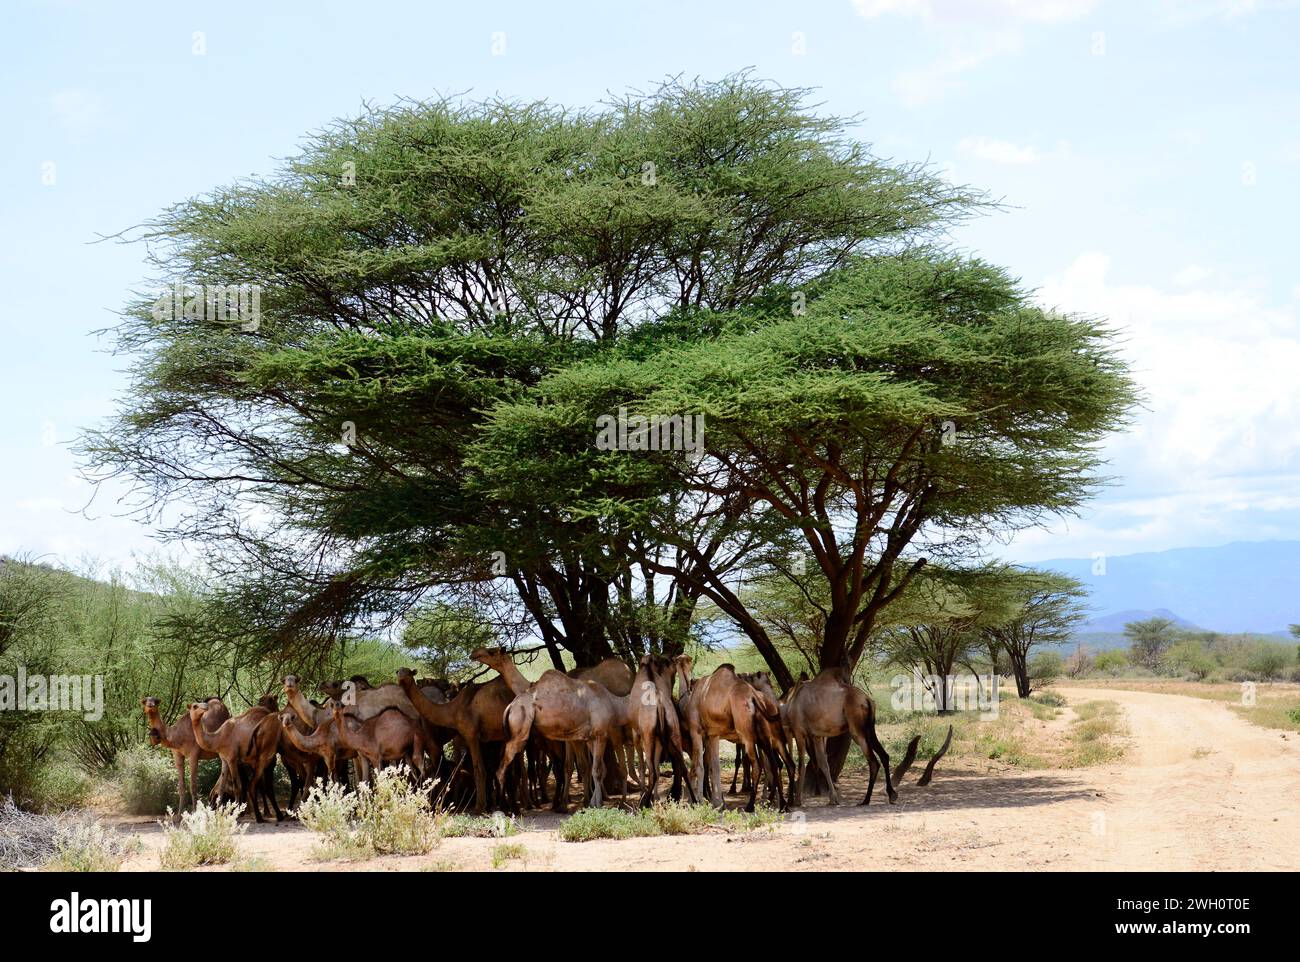 A herd of camel standing in the shade of an Acacia tree in the South Horr region in northern Kenya. Stock Photo